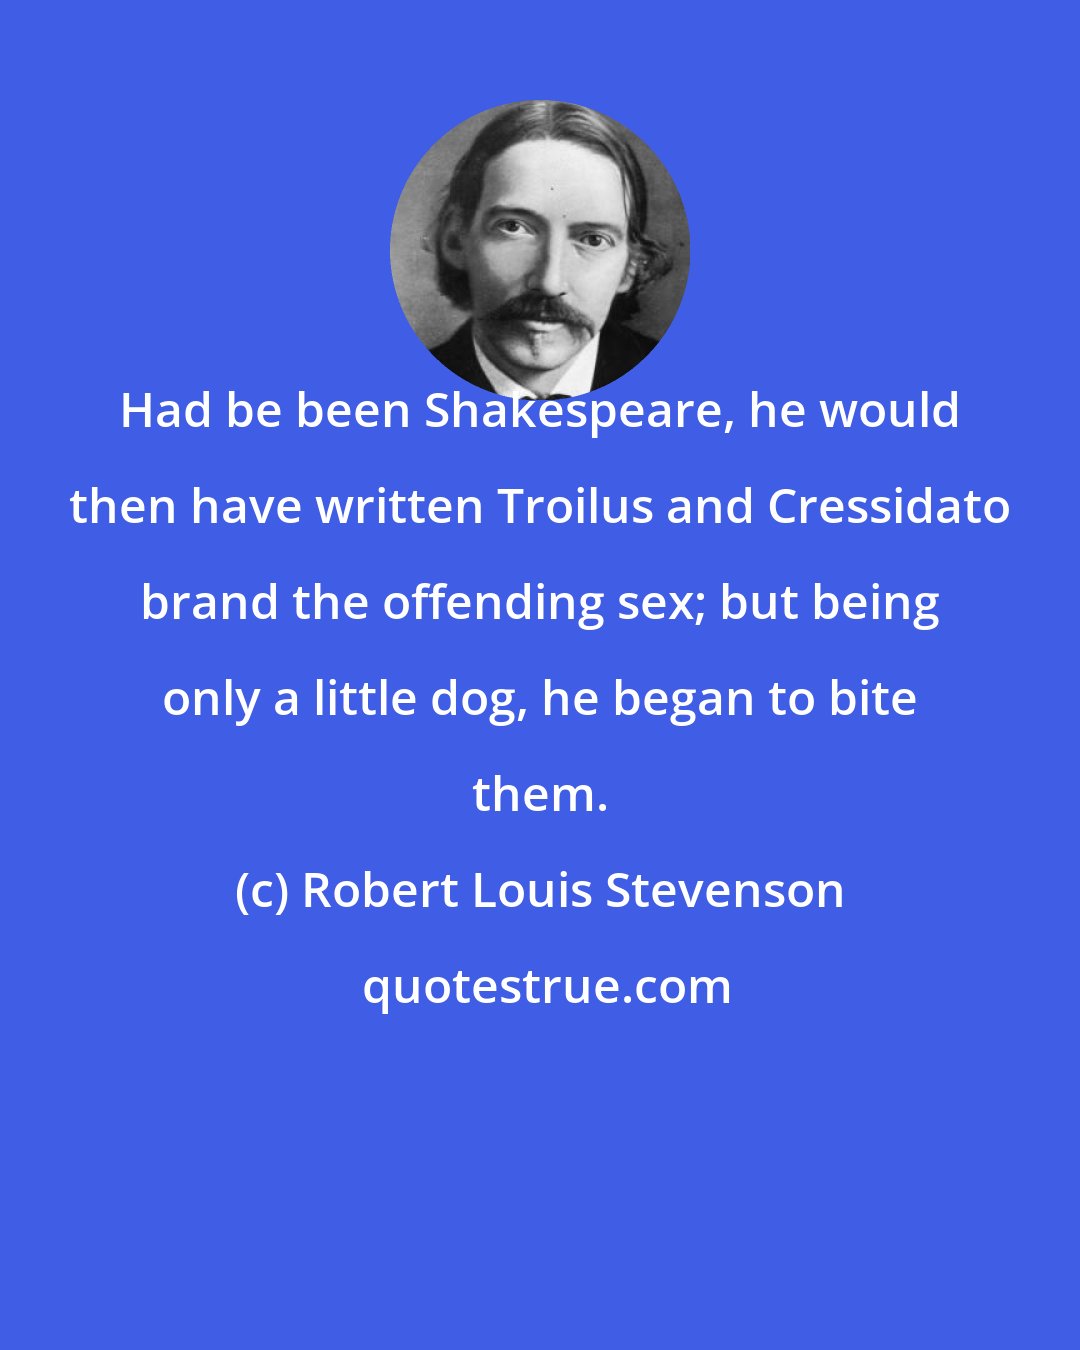 Robert Louis Stevenson: Had be been Shakespeare, he would then have written Troilus and Cressidato brand the offending sex; but being only a little dog, he began to bite them.